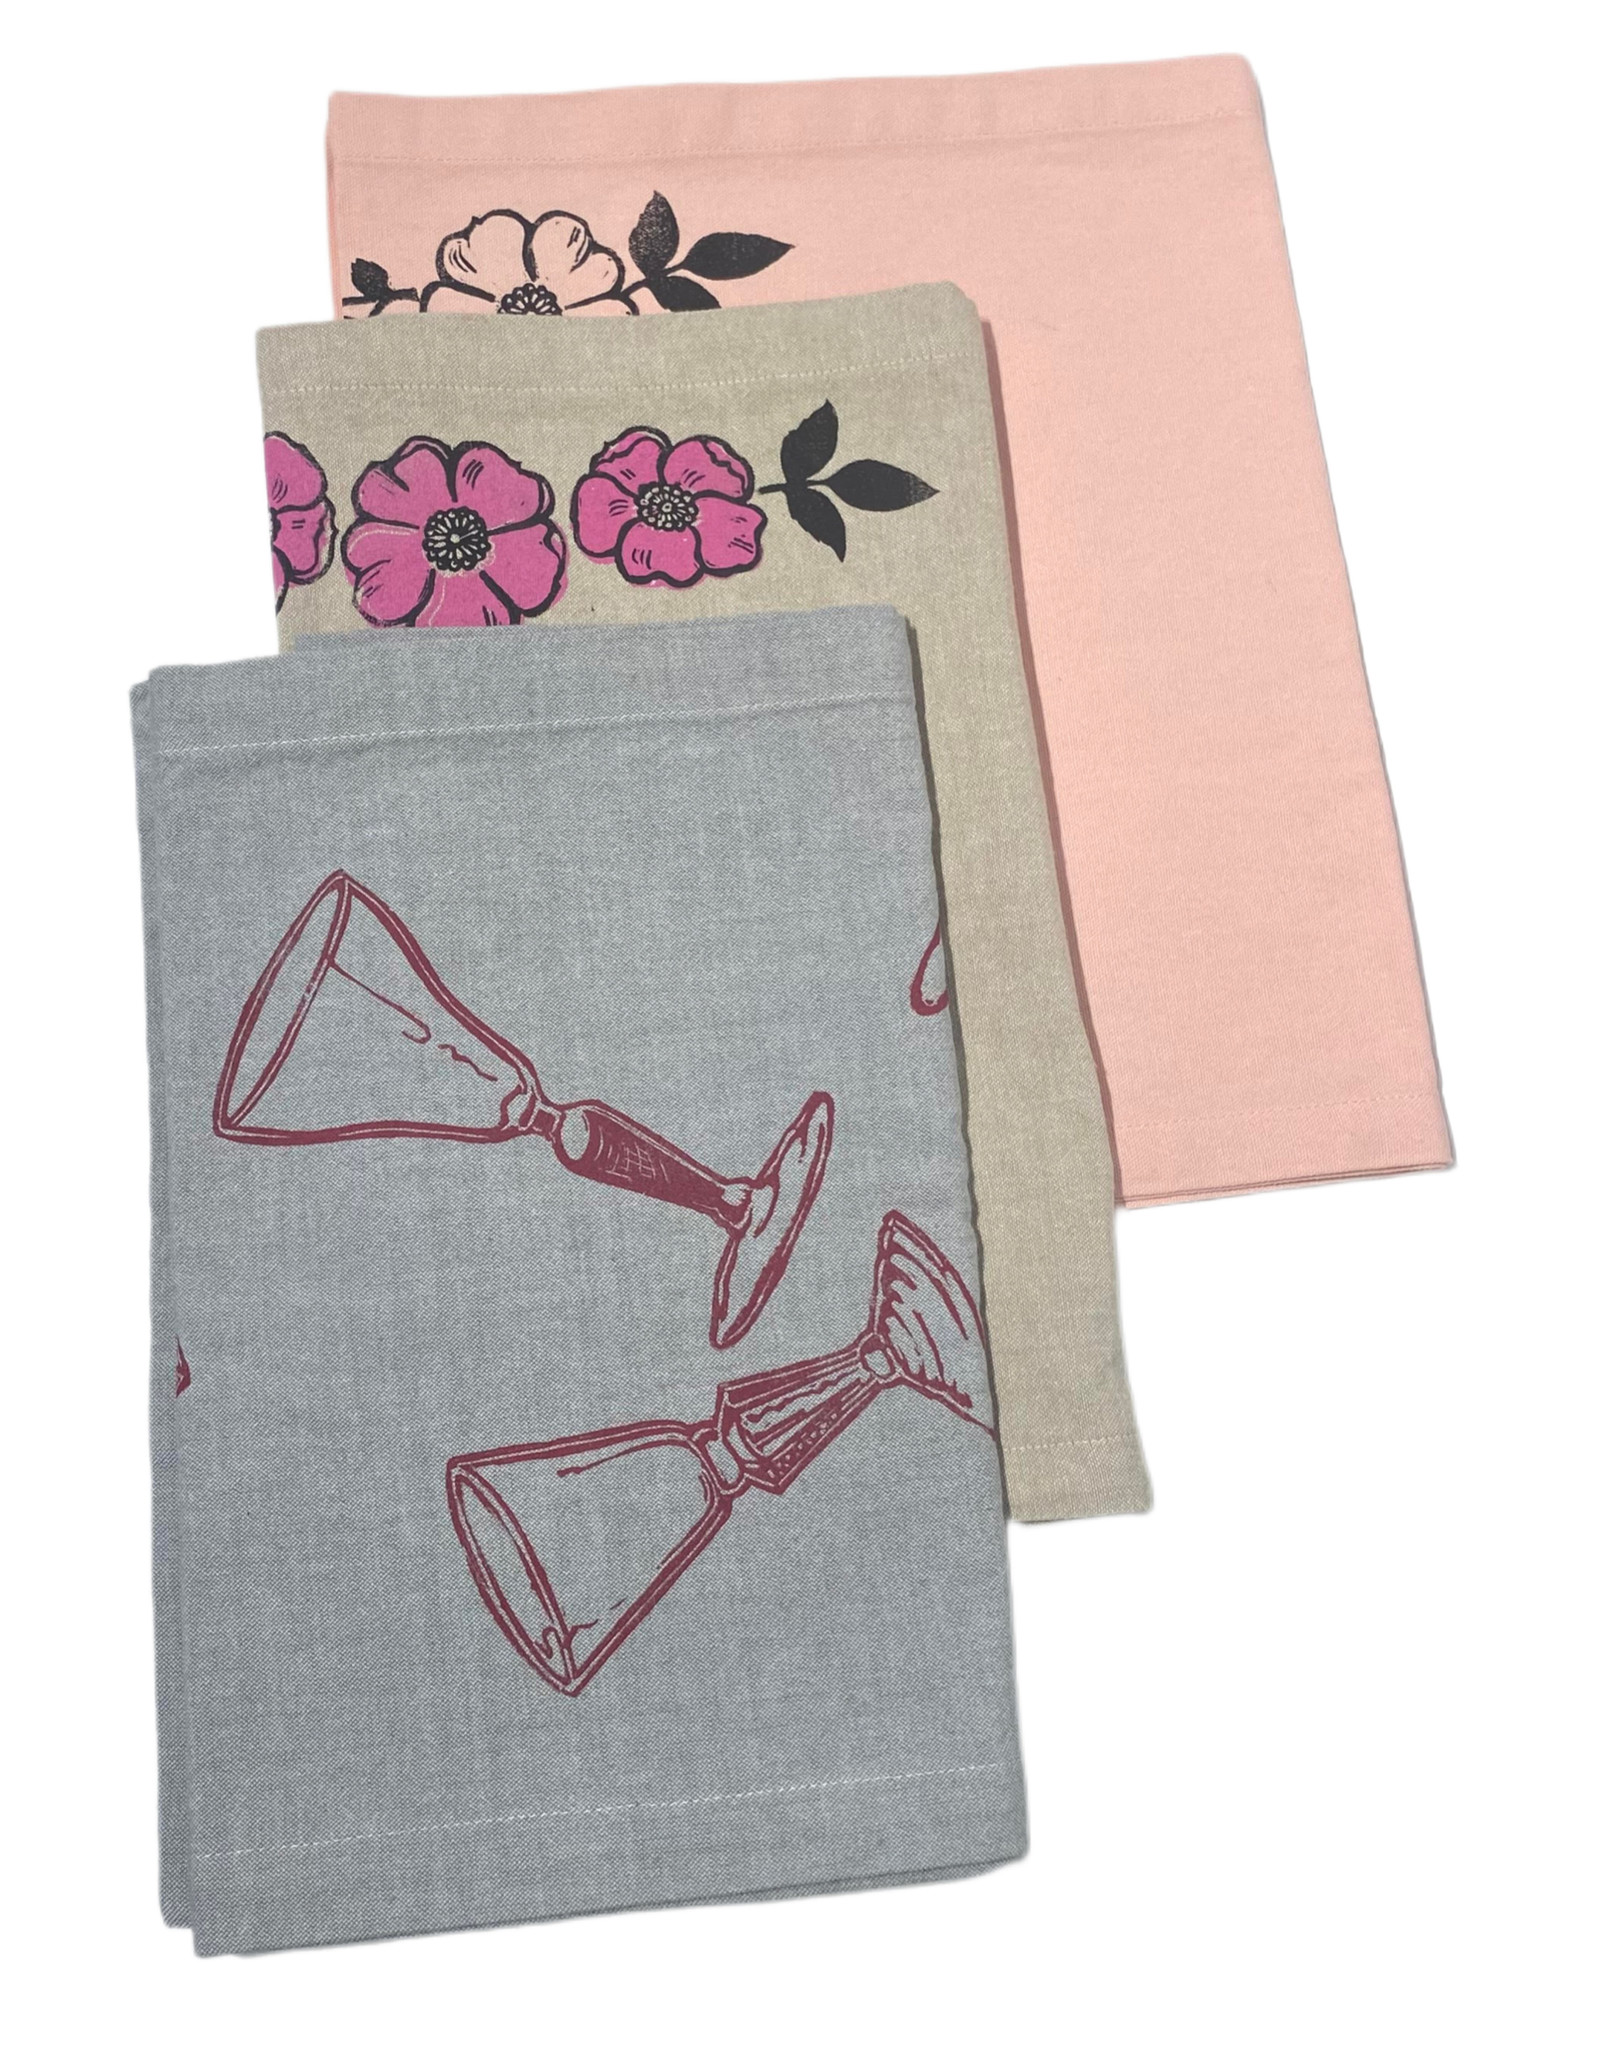 Cabot & Rose Table Runner  hand printed by Teena Marie Fancey